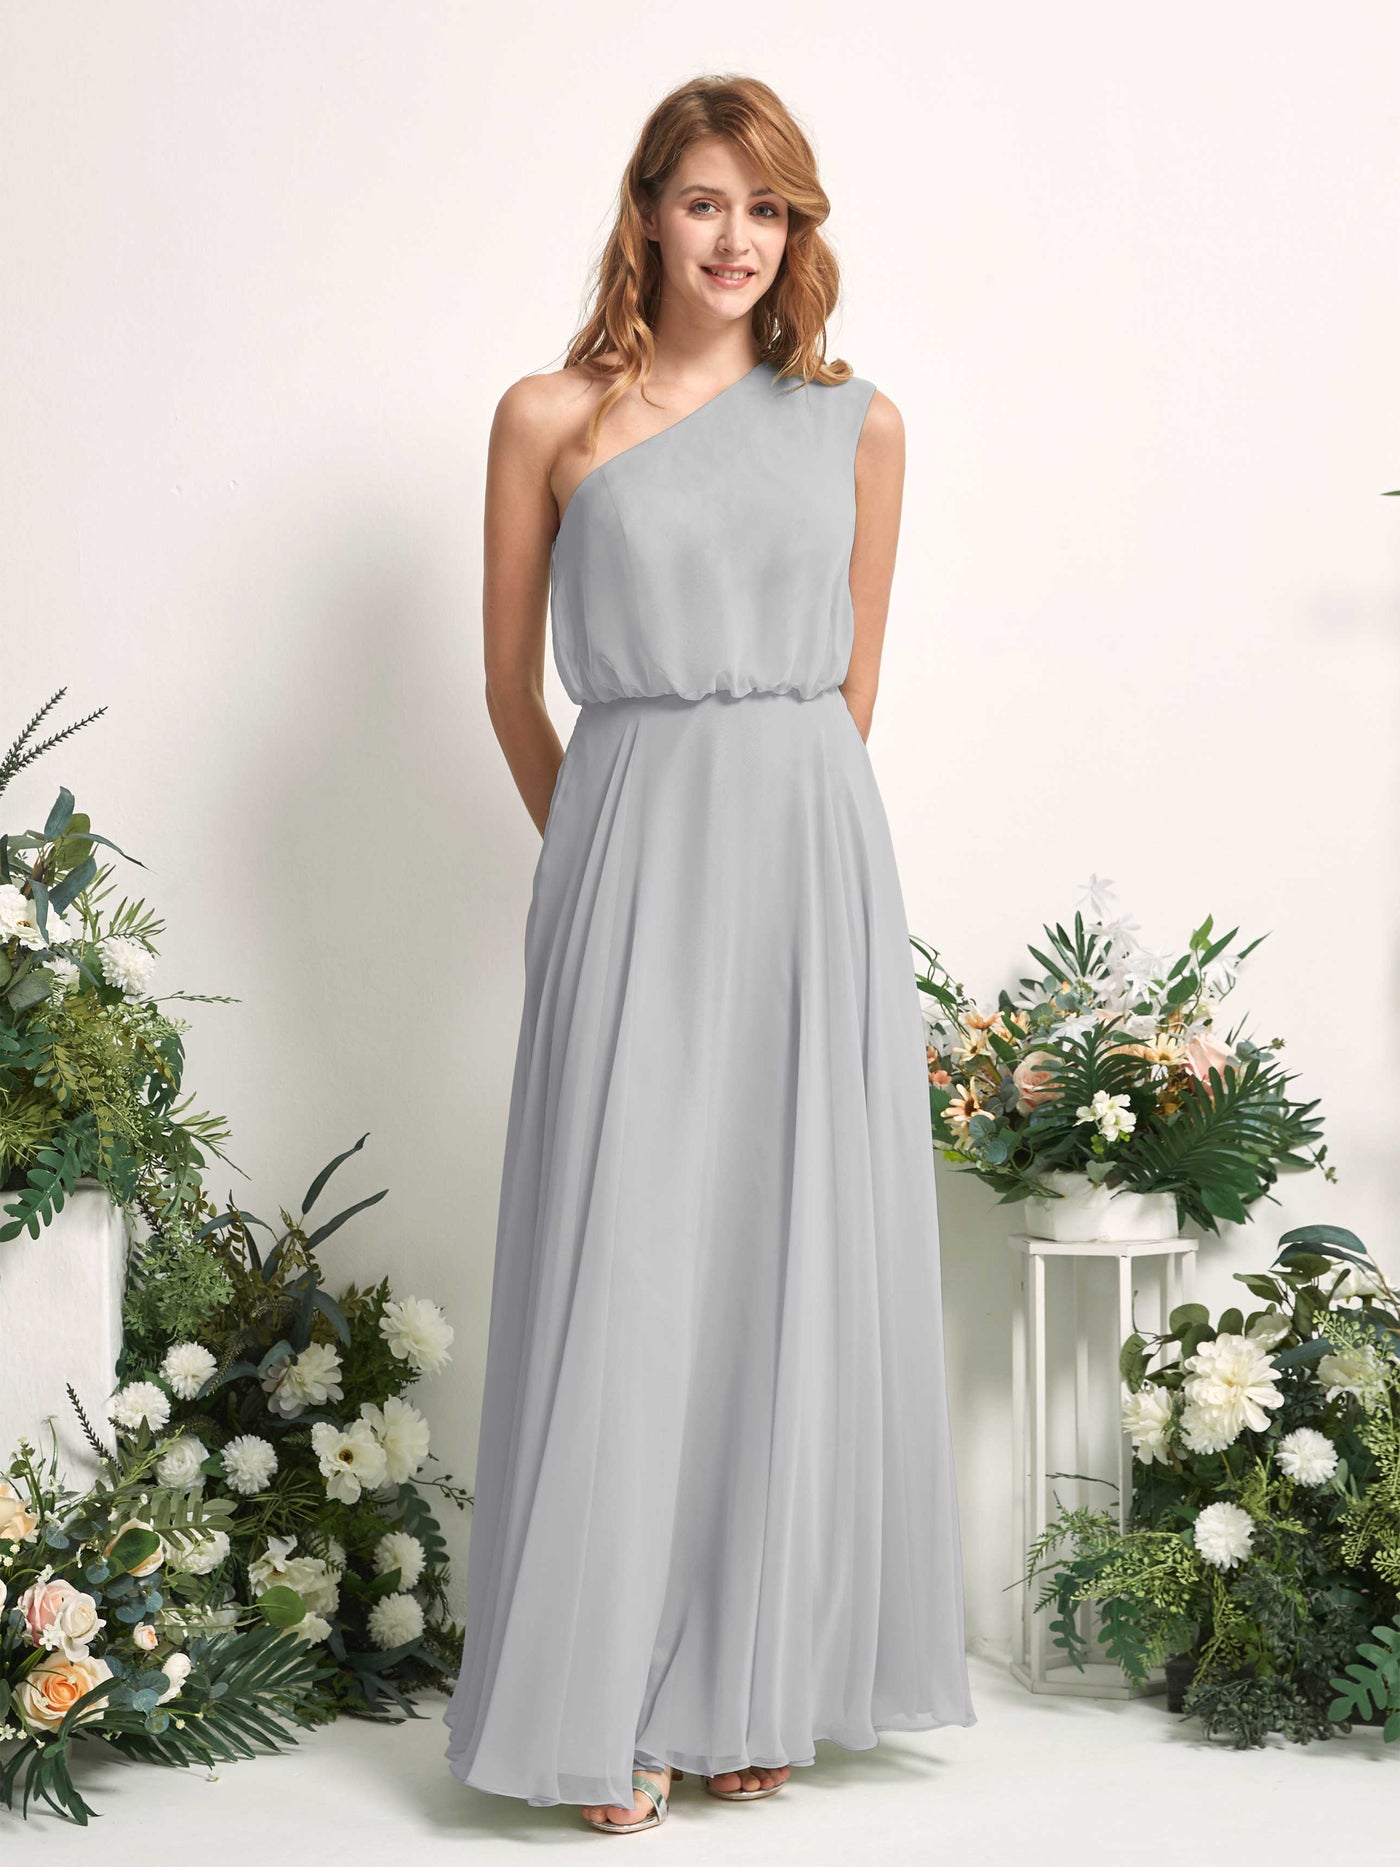 Bridesmaid Dress A-line Chiffon One Shoulder Full Length Sleeveless Wedding Party Dress - Silver (81226827)#color_silver